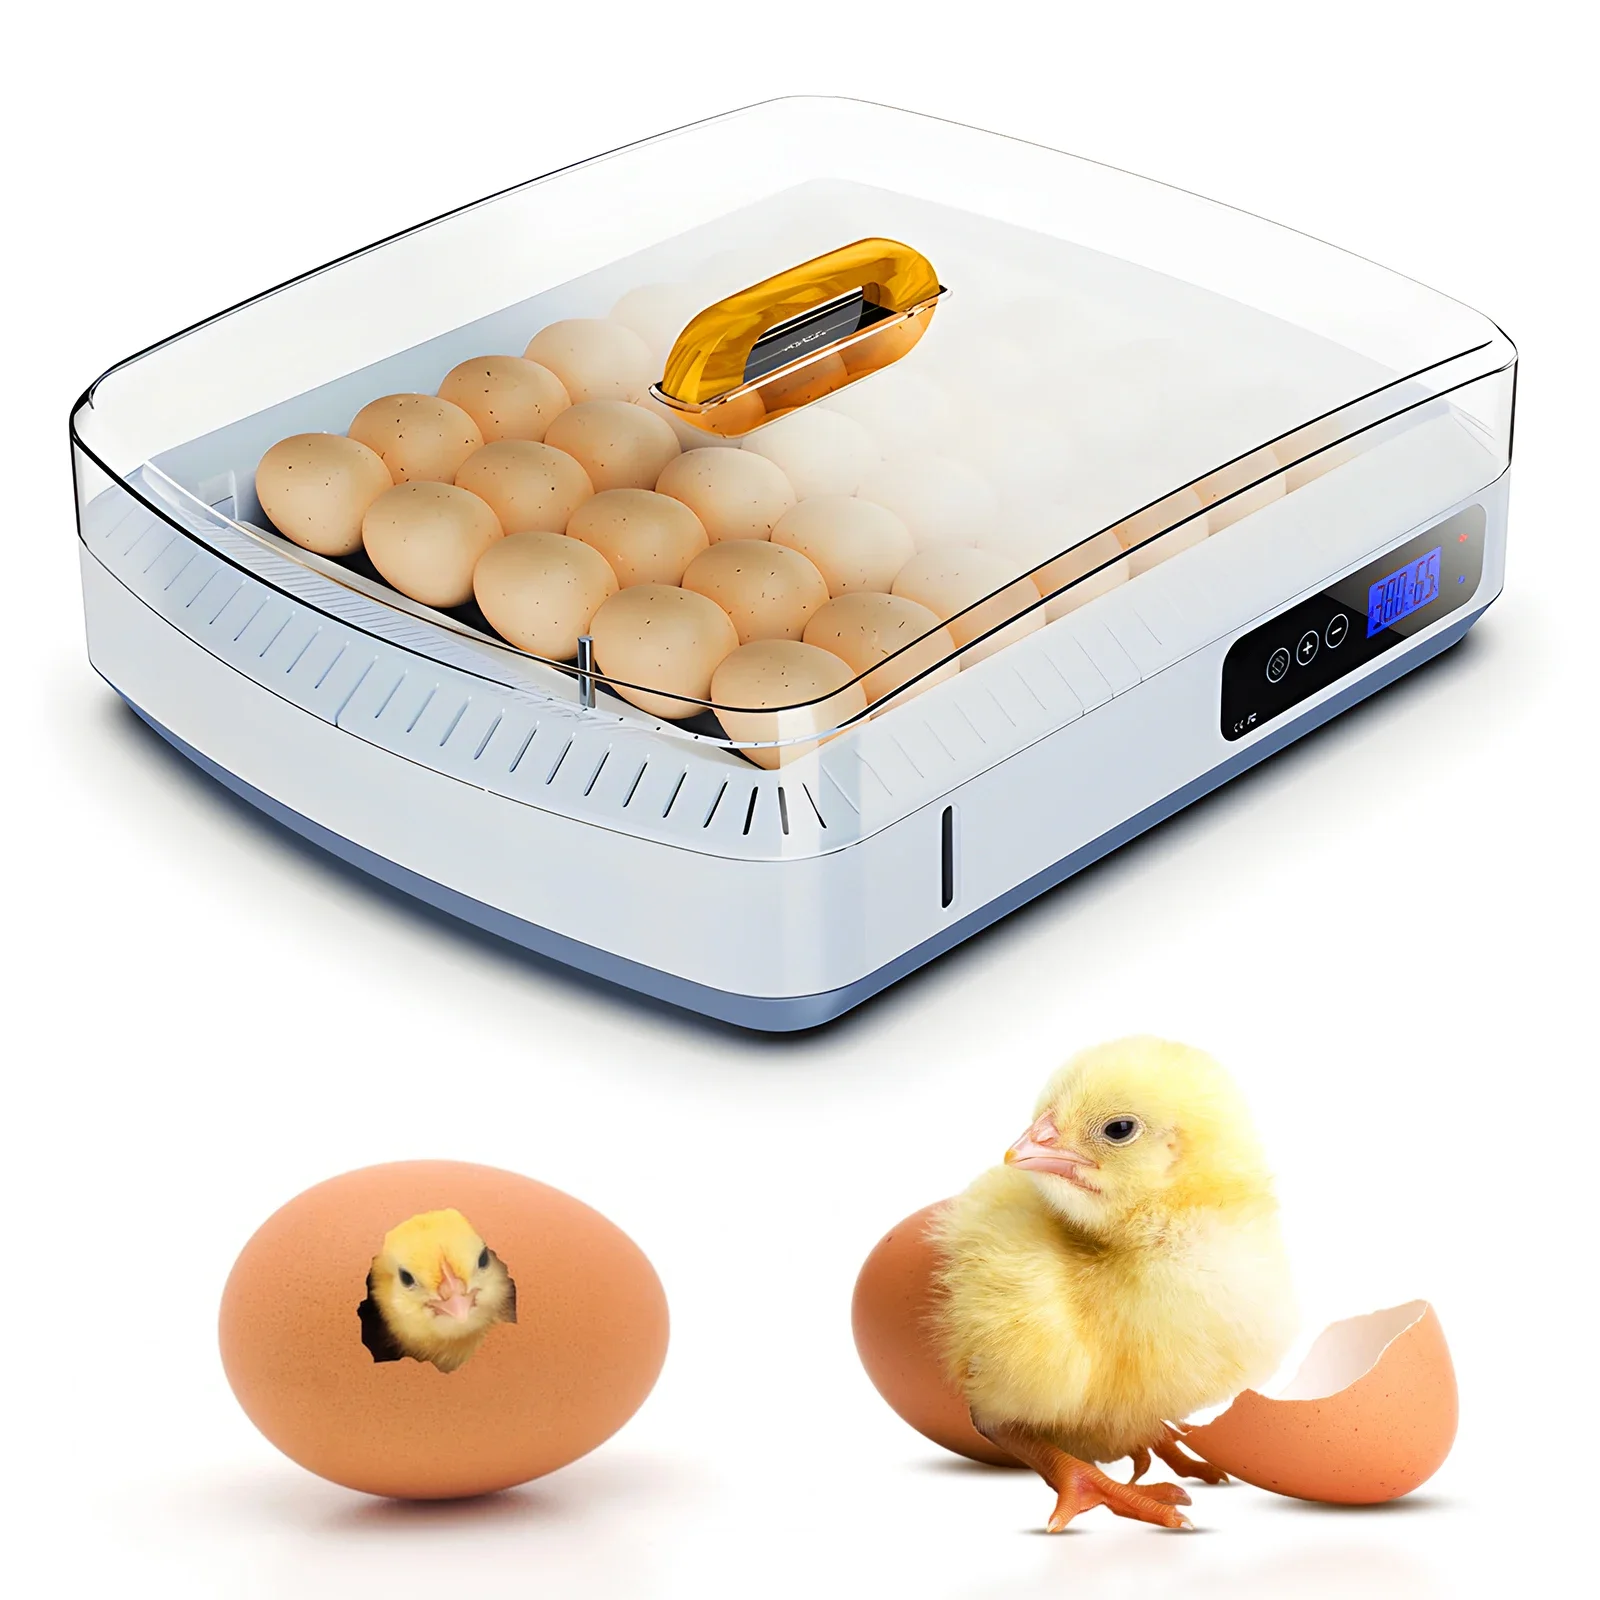 

35 Egg Incubator Automatic Turner Incubators For Hatching Eggs With Temperature And Humidity Display Hatcher Machine For Chicken